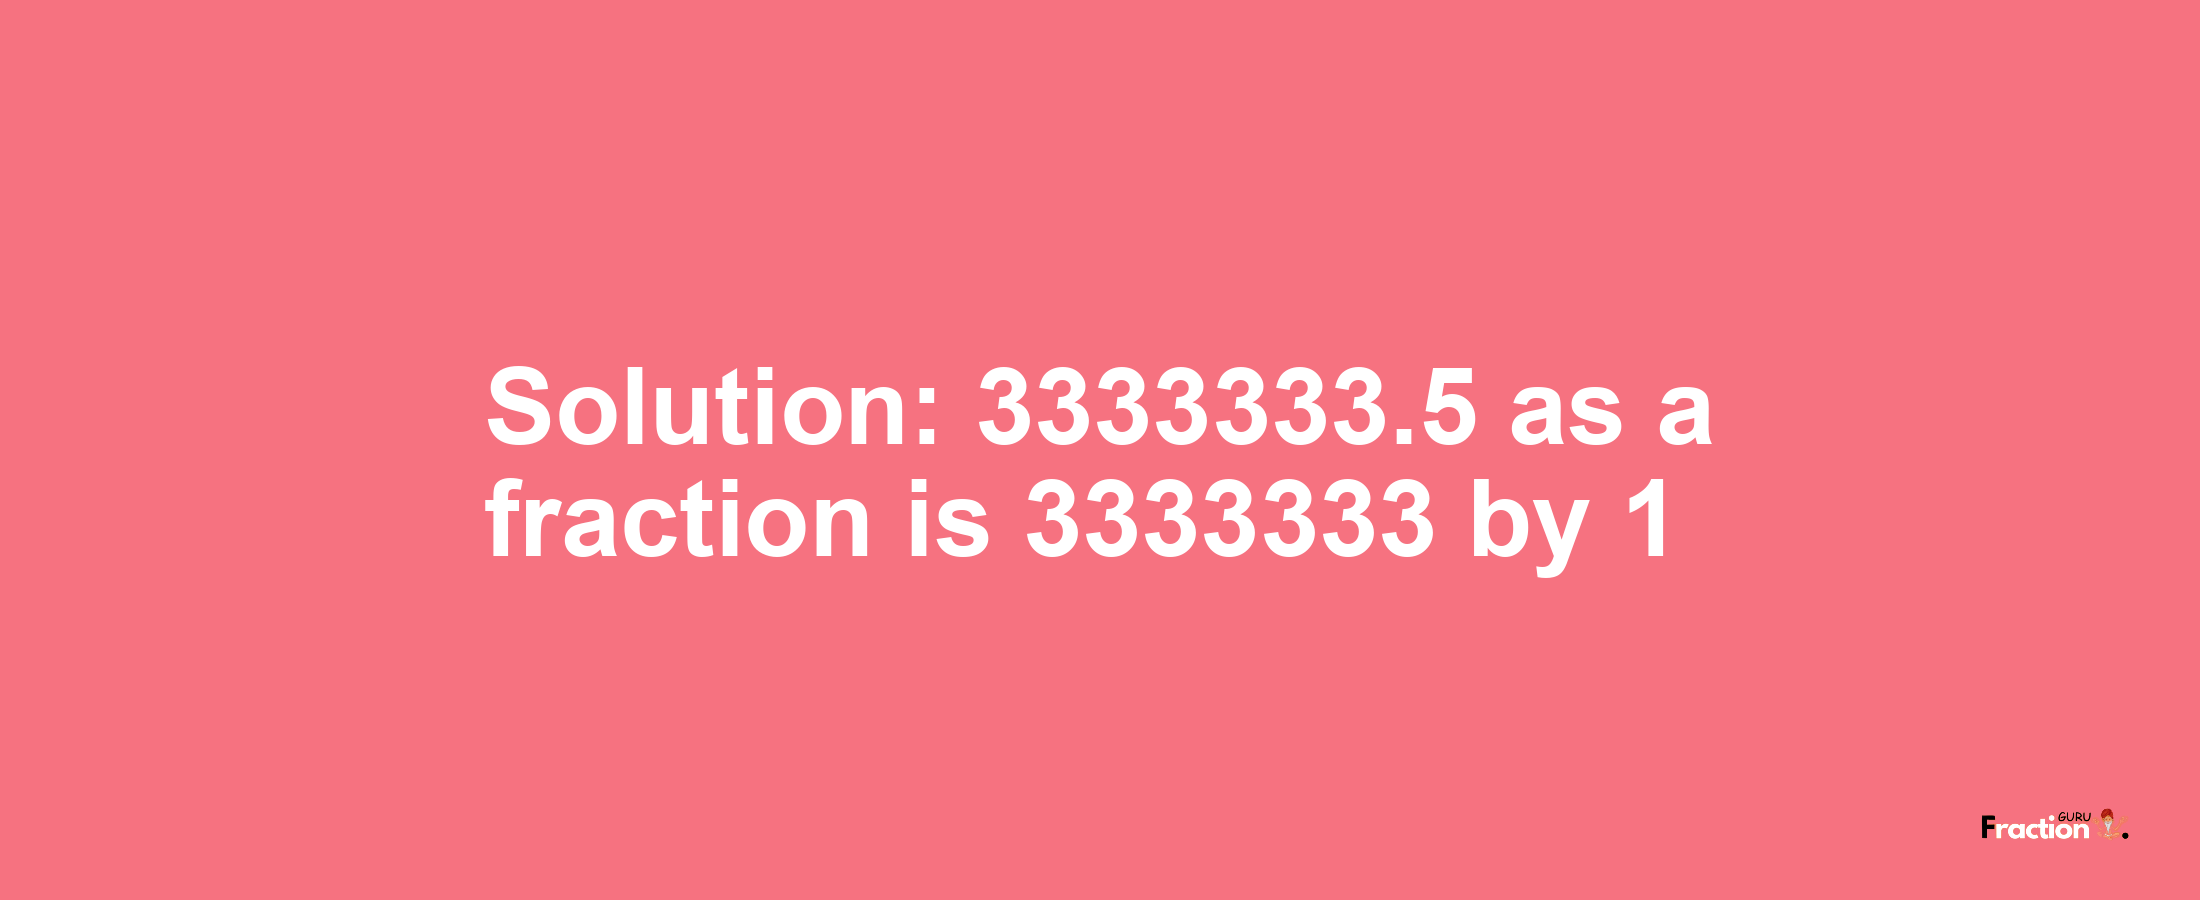 Solution:3333333.5 as a fraction is 3333333/1